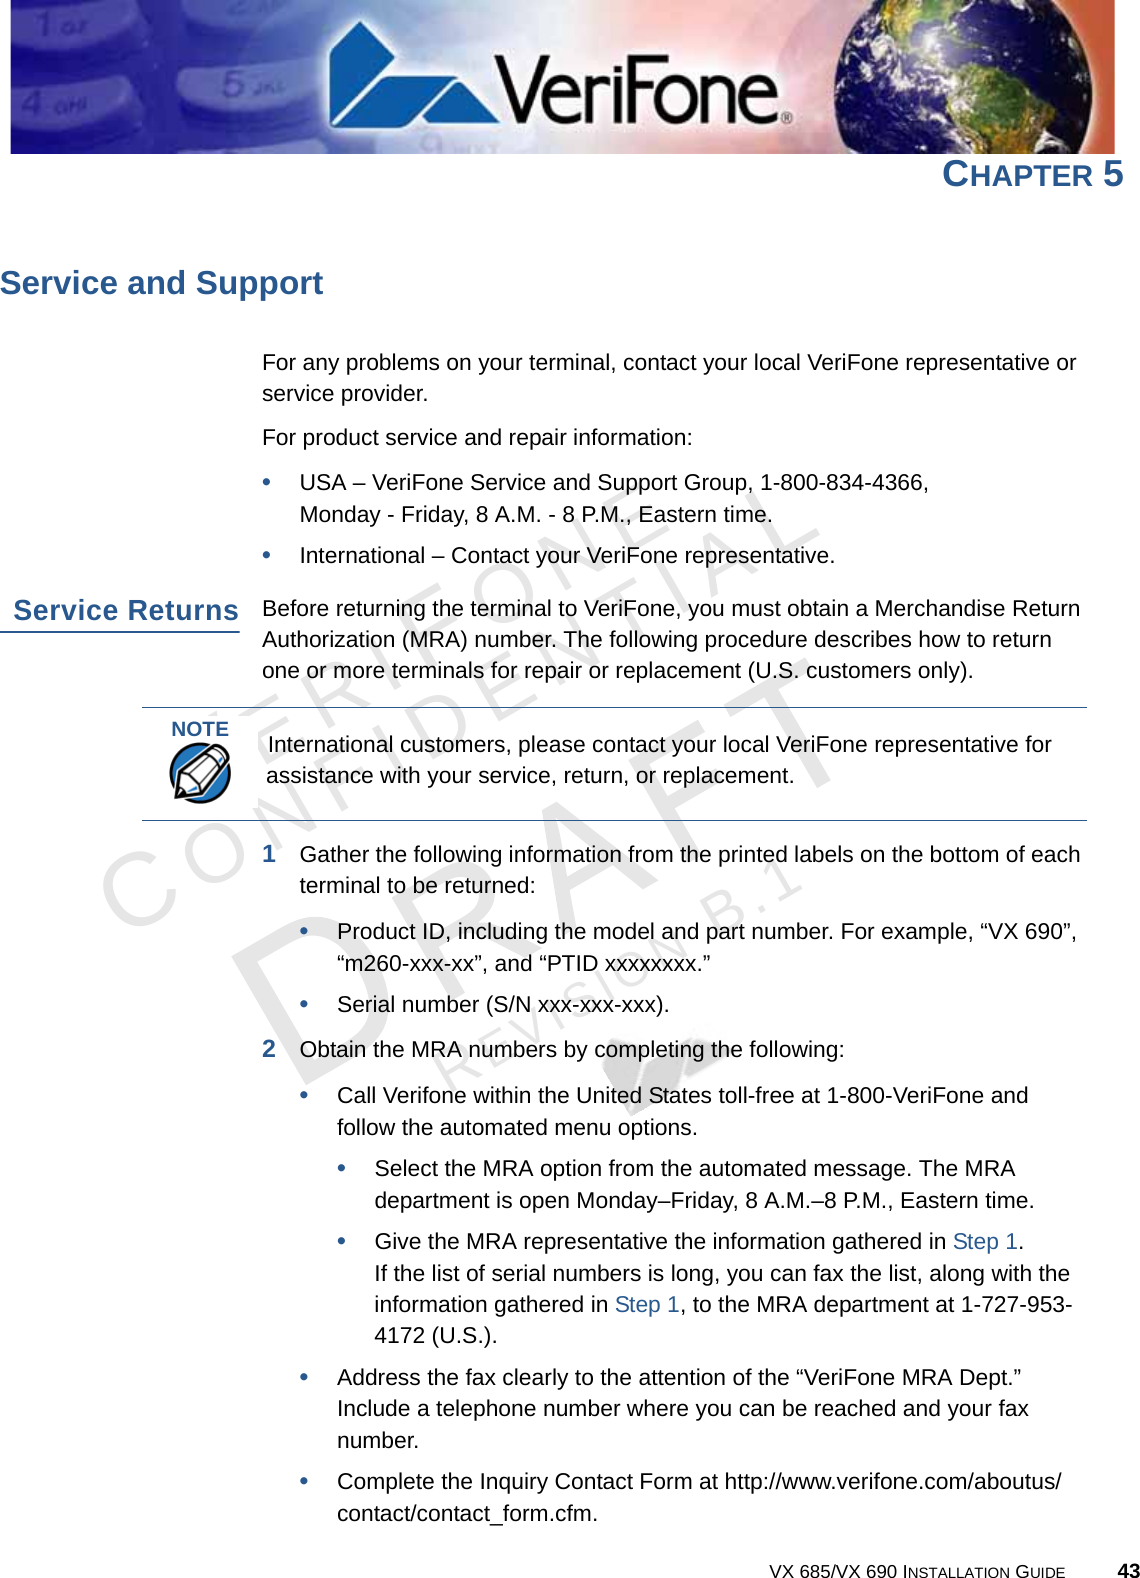 VERIFONECONFIDENTIALREVISION B.1 VX 685/VX 690 INSTALLATION GUIDE 43CHAPTER 5Service and SupportFor any problems on your terminal, contact your local VeriFone representative or service provider.For product service and repair information:•USA – VeriFone Service and Support Group, 1-800-834-4366, Monday - Friday, 8 A.M. - 8 P.M., Eastern time.•International – Contact your VeriFone representative.Service ReturnsBefore returning the terminal to VeriFone, you must obtain a Merchandise Return Authorization (MRA) number. The following procedure describes how to return one or more terminals for repair or replacement (U.S. customers only).1Gather the following information from the printed labels on the bottom of each terminal to be returned:•Product ID, including the model and part number. For example, “VX 690”,“m260-xxx-xx”, and “PTID xxxxxxxx.”•Serial number (S/N xxx-xxx-xxx).2Obtain the MRA numbers by completing the following:•Call Verifone within the United States toll-free at 1-800-VeriFone and follow the automated menu options.•Select the MRA option from the automated message. The MRA department is open Monday–Friday, 8 A.M.–8 P.M., Eastern time.•Give the MRA representative the information gathered in Step 1.If the list of serial numbers is long, you can fax the list, along with the information gathered in Step 1, to the MRA department at 1-727-953-4172 (U.S.).•Address the fax clearly to the attention of the “VeriFone MRA Dept.” Include a telephone number where you can be reached and your fax number.•Complete the Inquiry Contact Form at http://www.verifone.com/aboutus/contact/contact_form.cfm.NOTEInternational customers, please contact your local VeriFone representative for assistance with your service, return, or replacement.